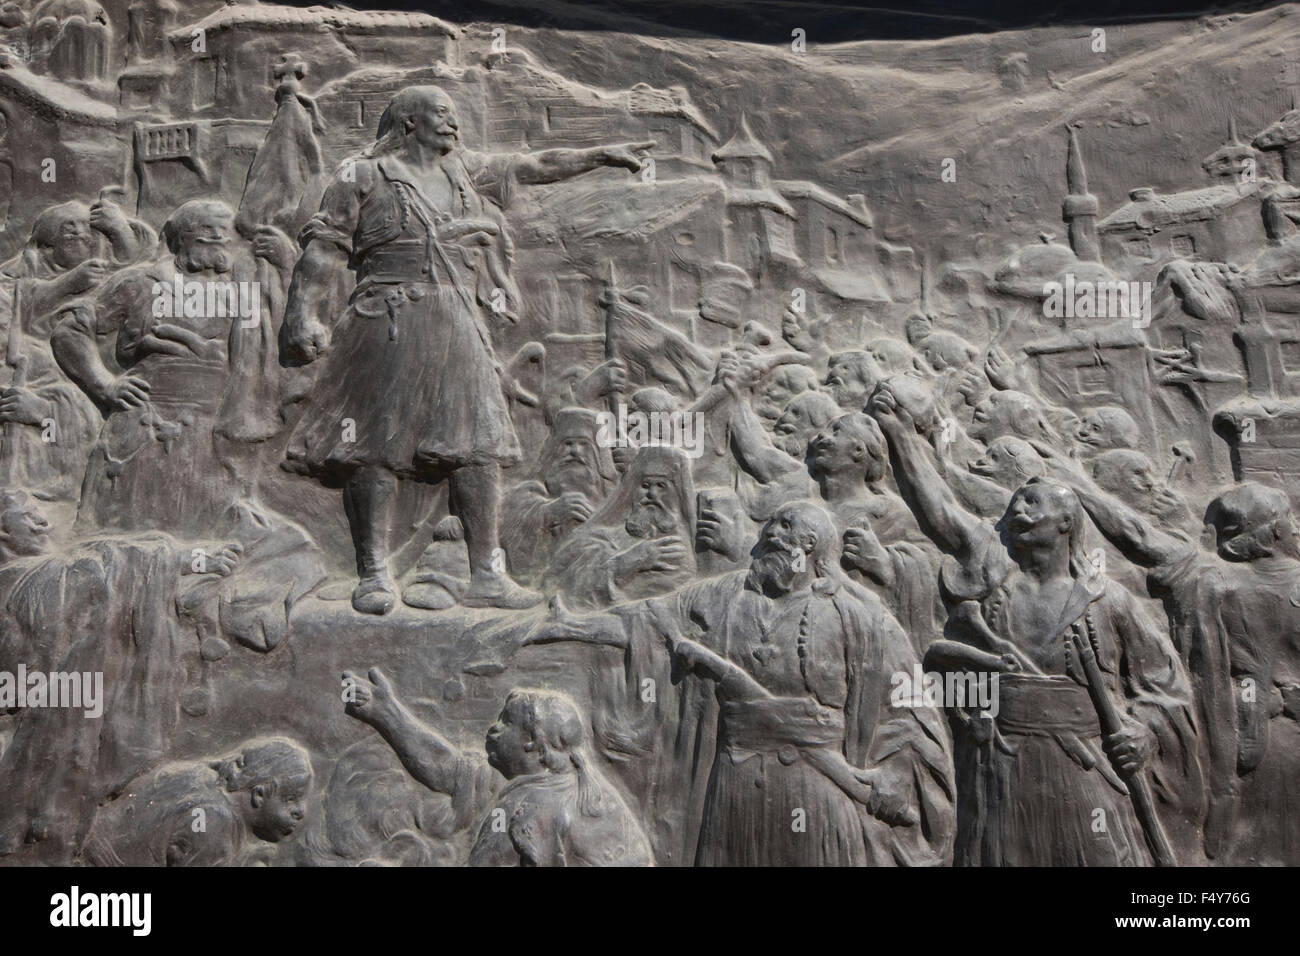 Closeup detail fom the Battle of Dervenakia and the old man of Morea giving a speech depiction, on the base of his monument. Stock Photo